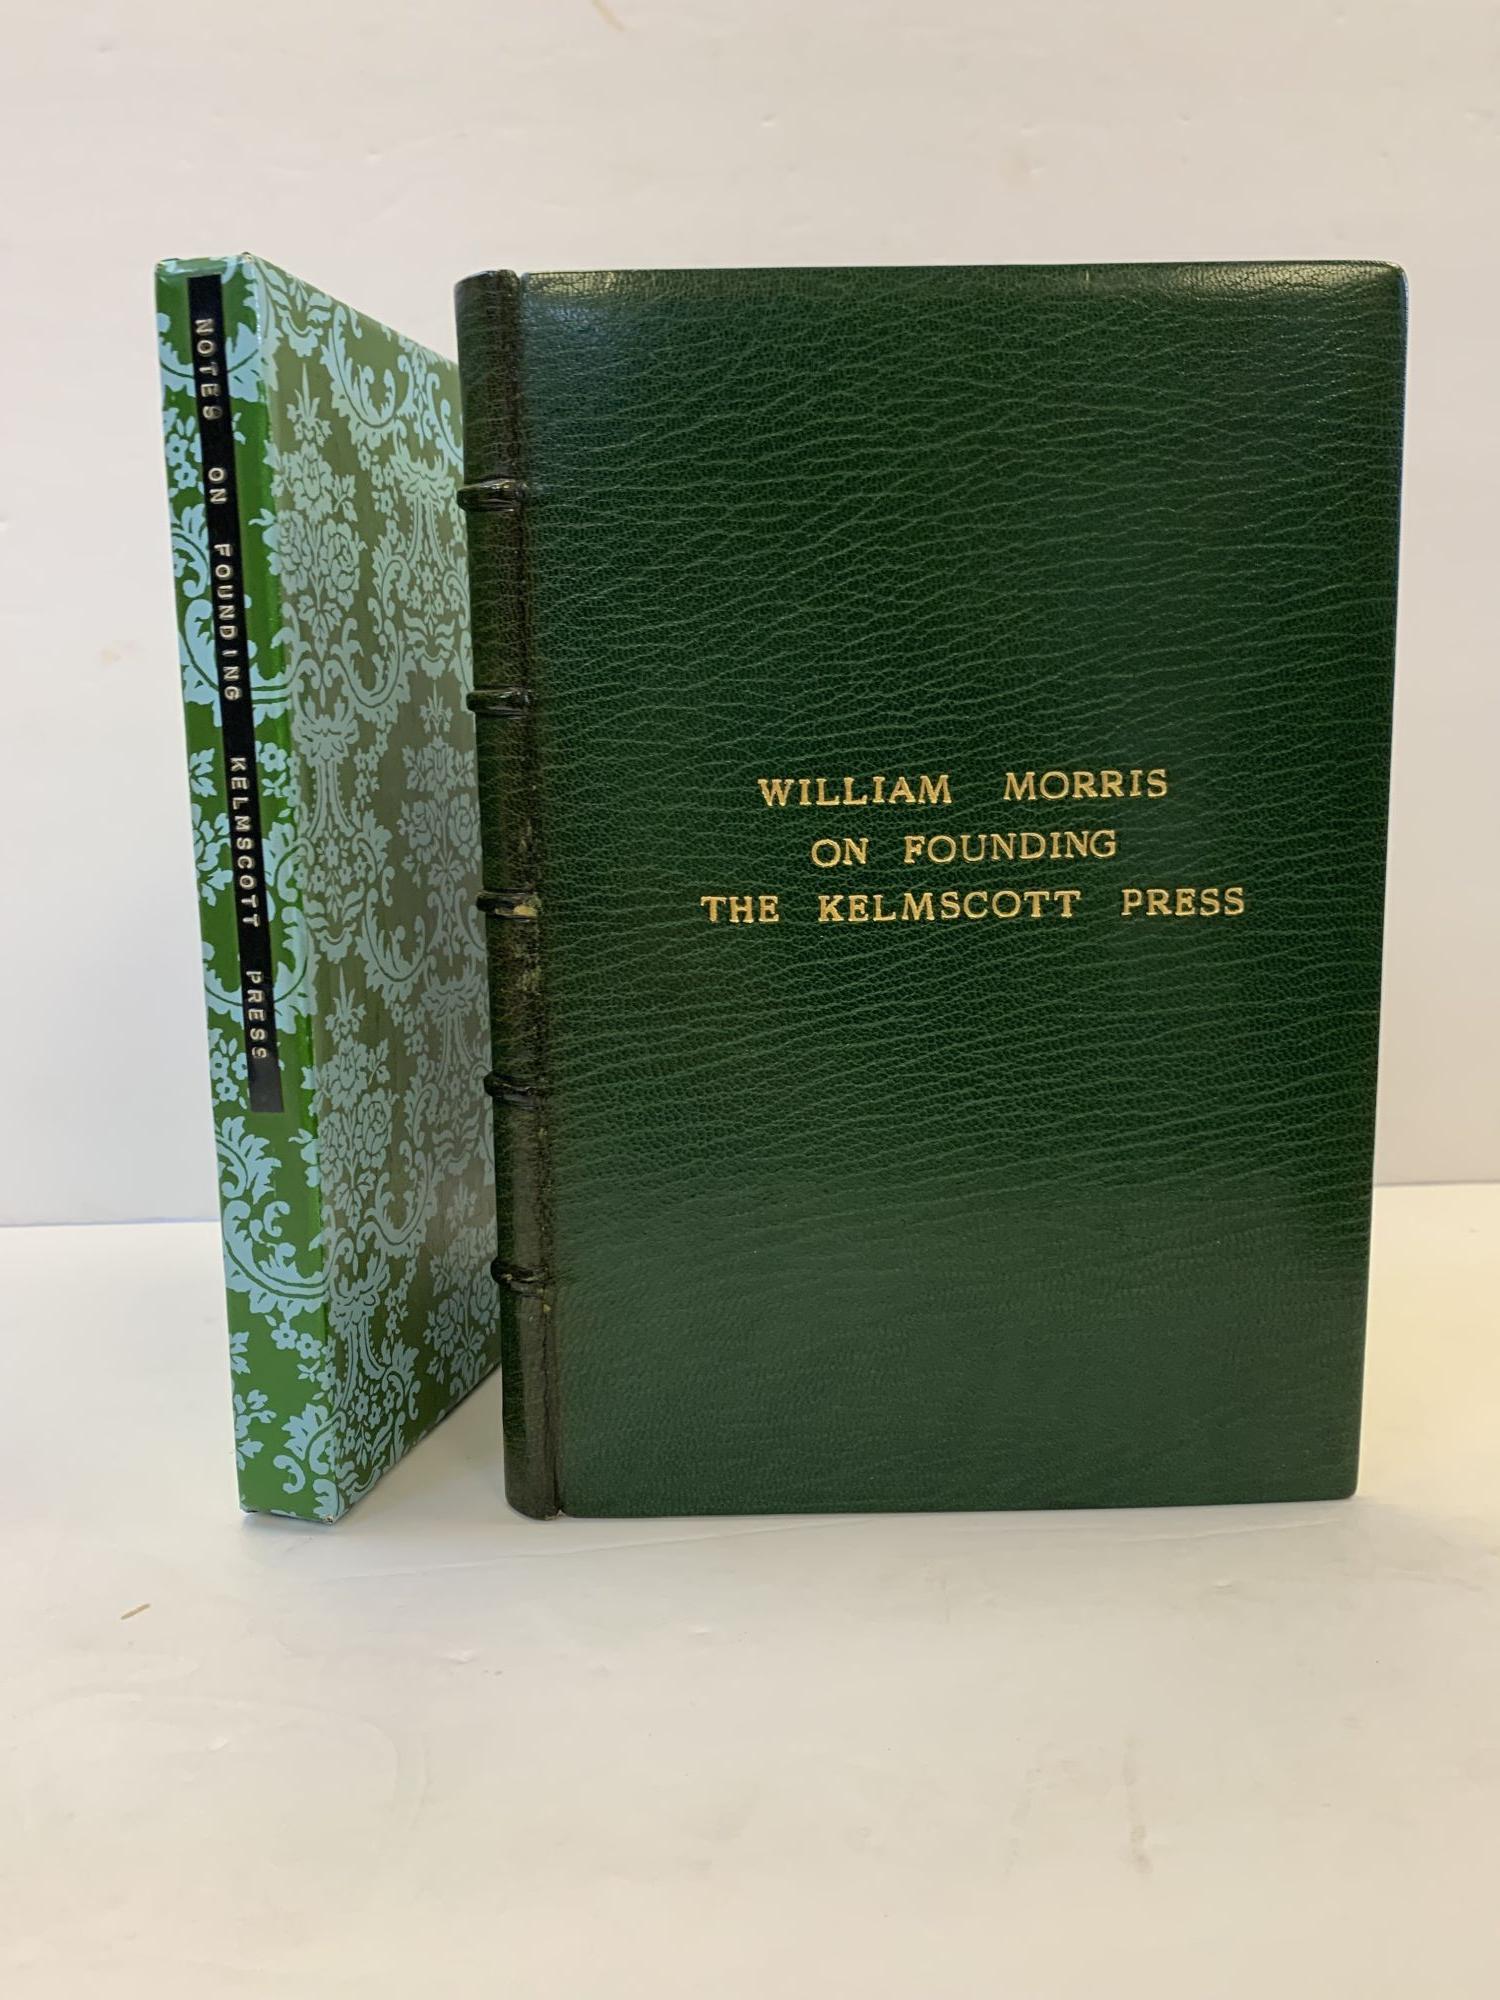 1366803 A NOTE BY WILLIAM MORRIS ON HIS AIMS IN FOUNDING THE KELMSCOTT PRESS. TOGETHER WITH A SHORT DESCRIPTION OF THE PRESS BY S.C. COCKERELL, & AN ANNOTATED LIST OF THE BOOKS PRINTED THEREAT. William Morris.